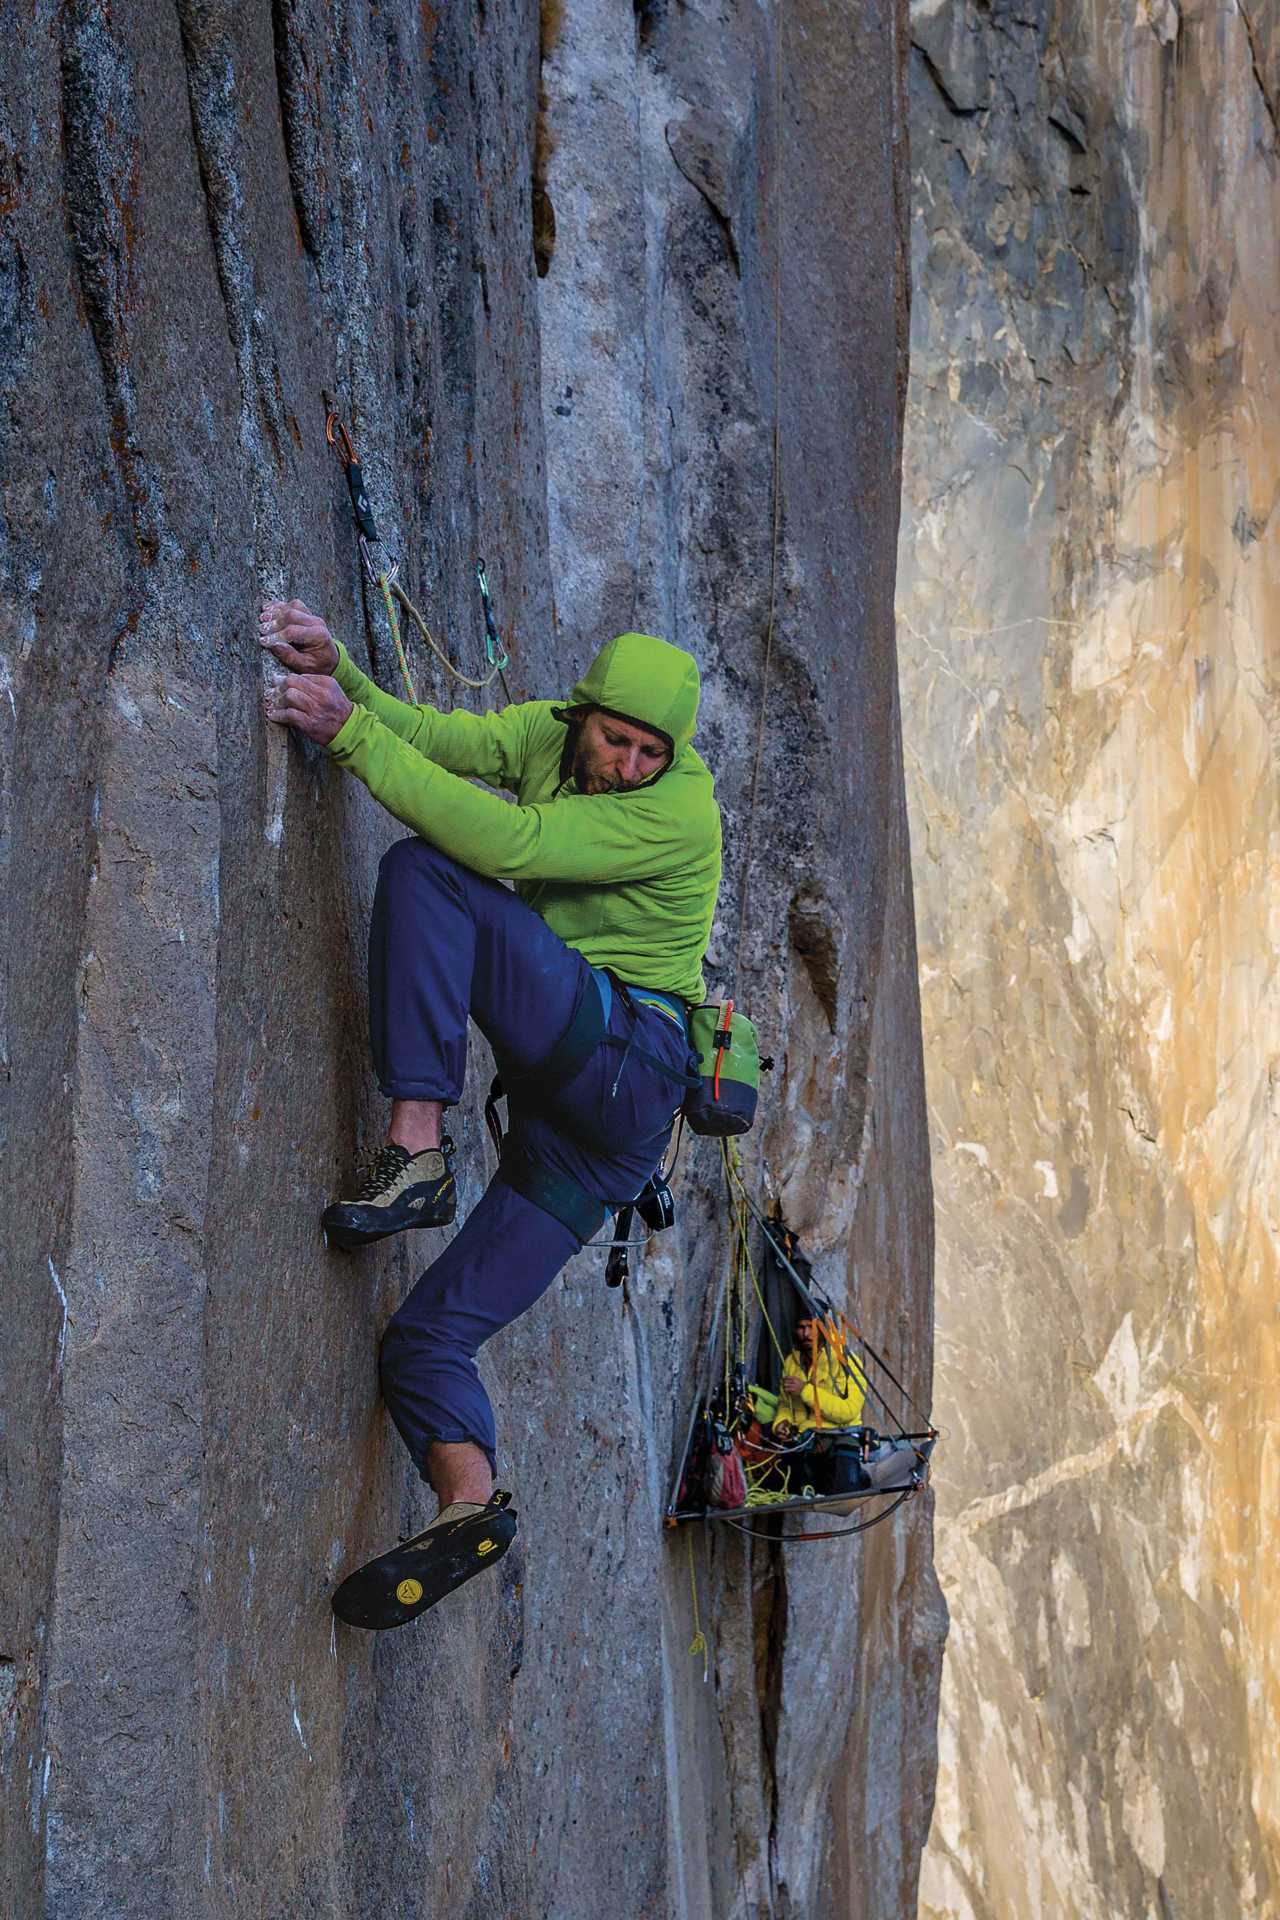 Tommy Caldwell climbing the Dawn Wall in Yosemite National Park